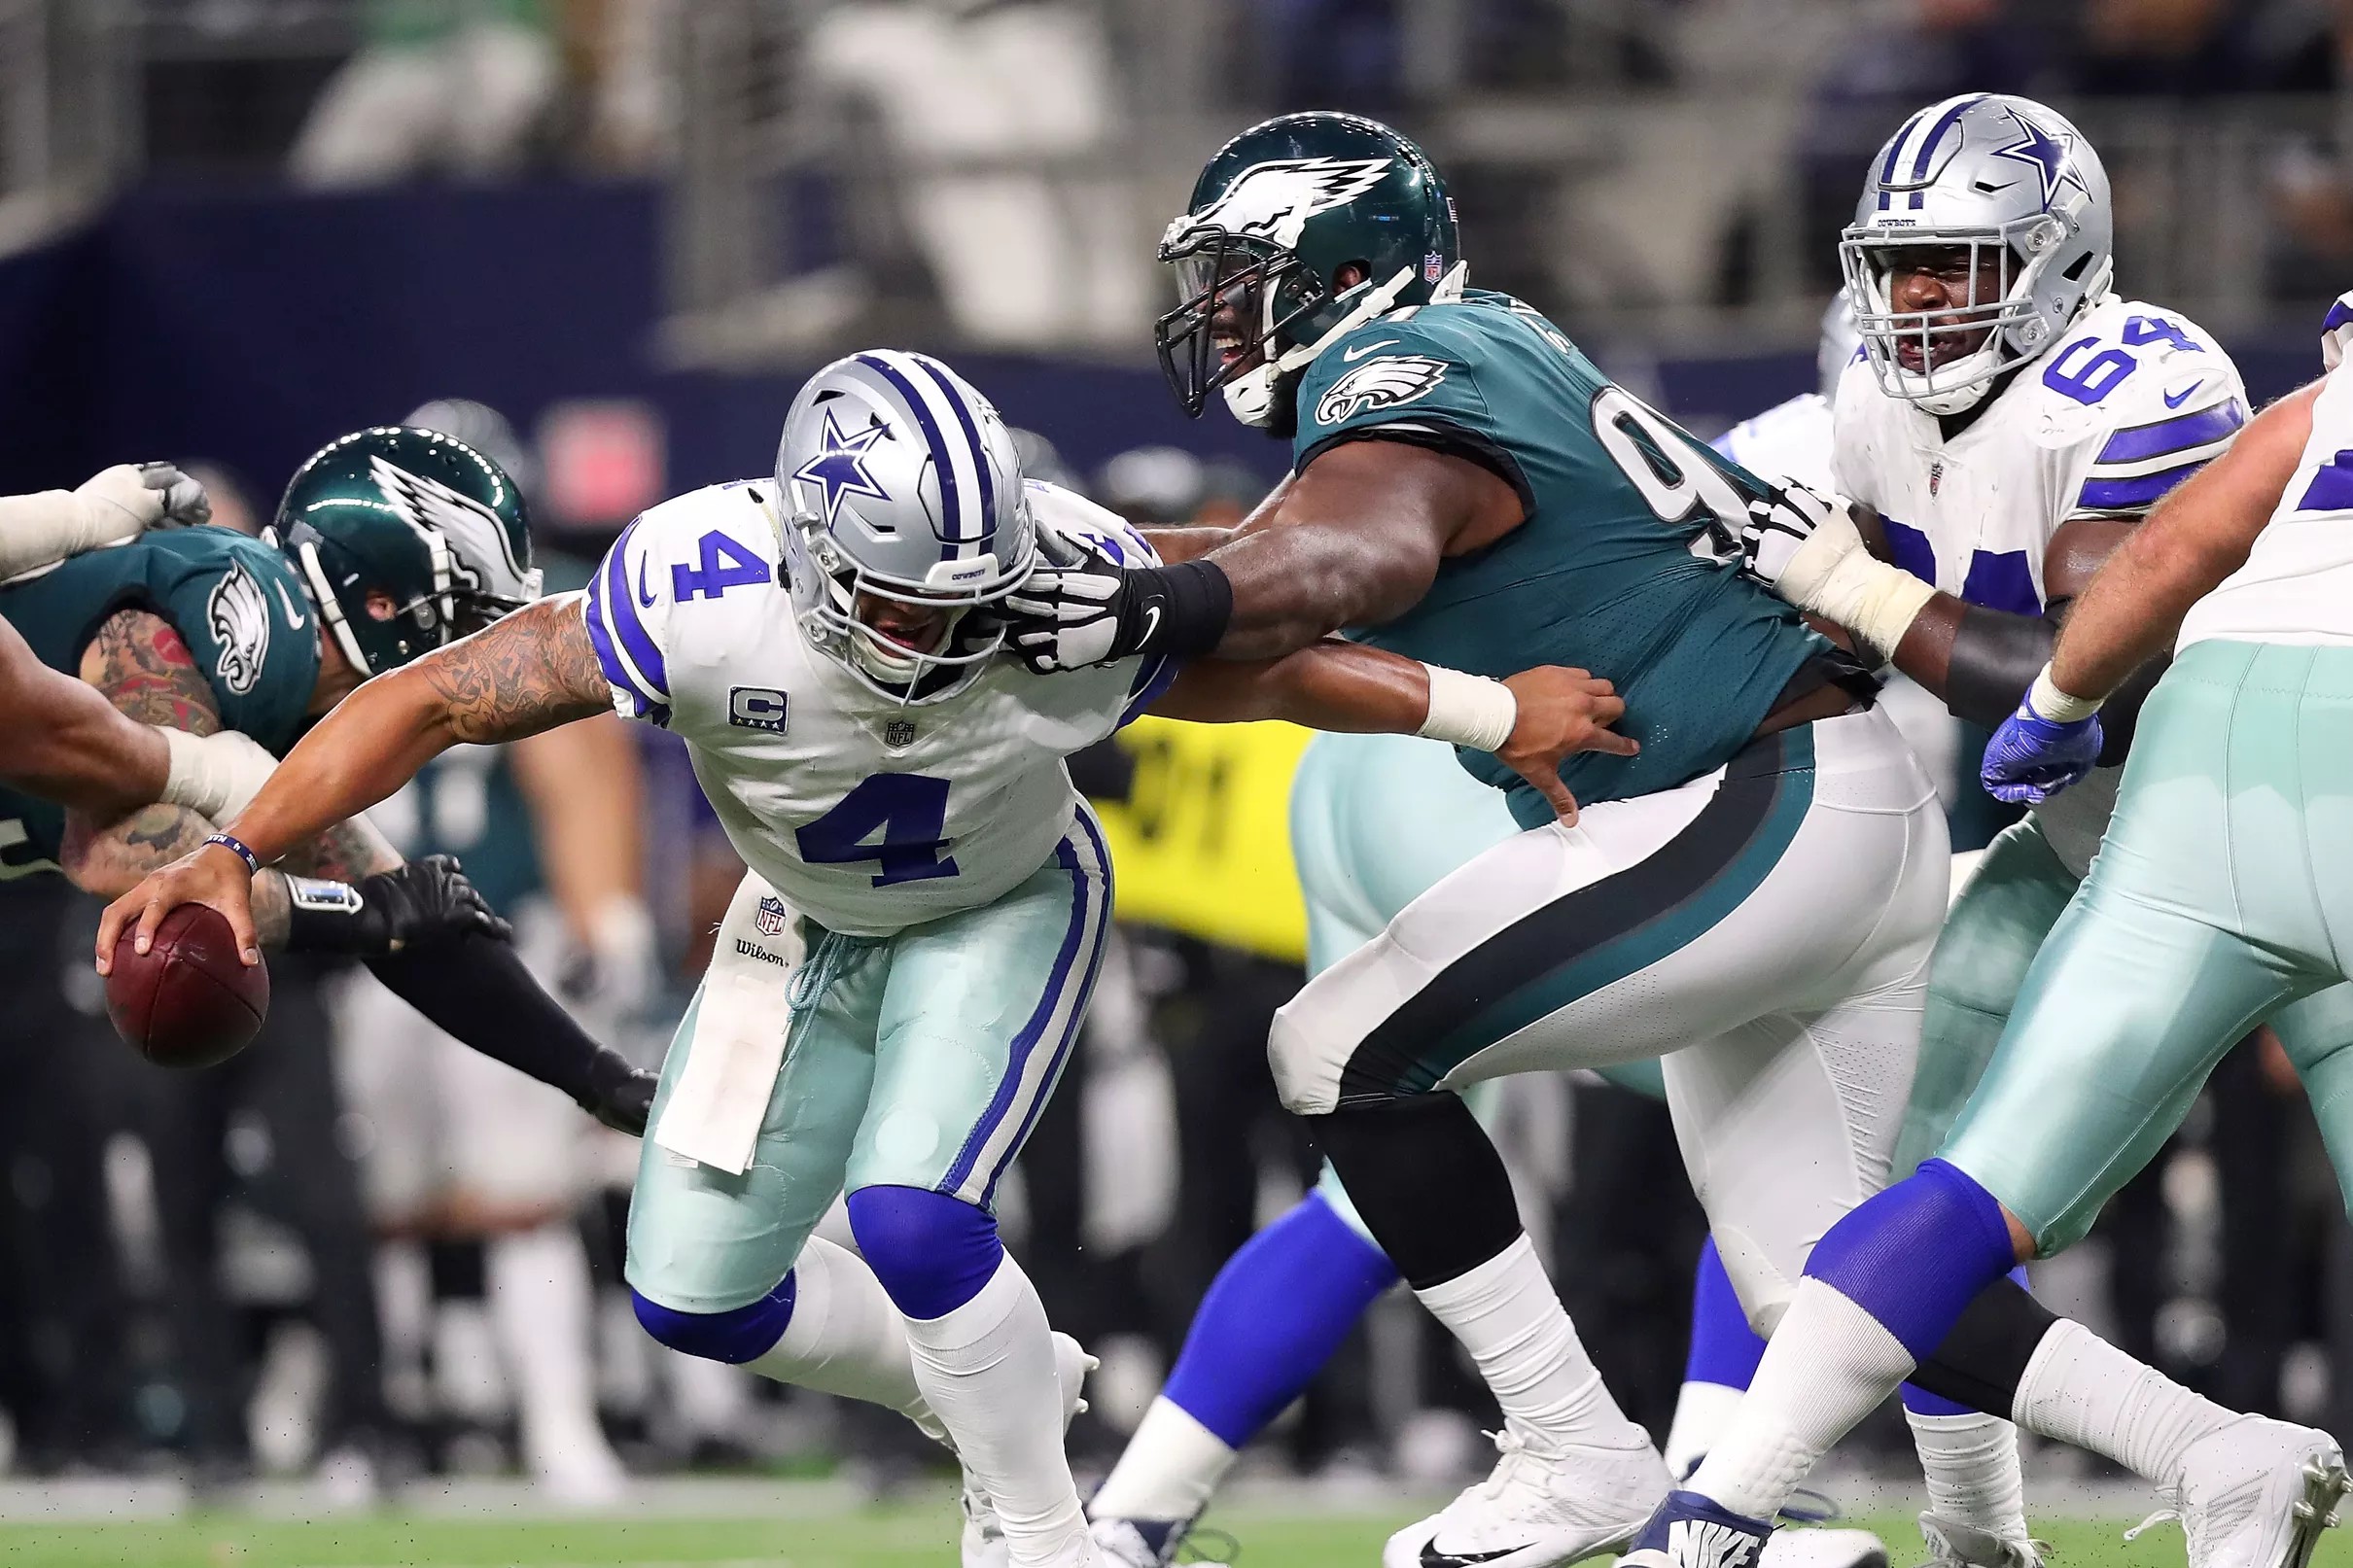 Eagles vs. Cowboys 2017: Game time, TV schedule, live online streaming, channel, radio, and more